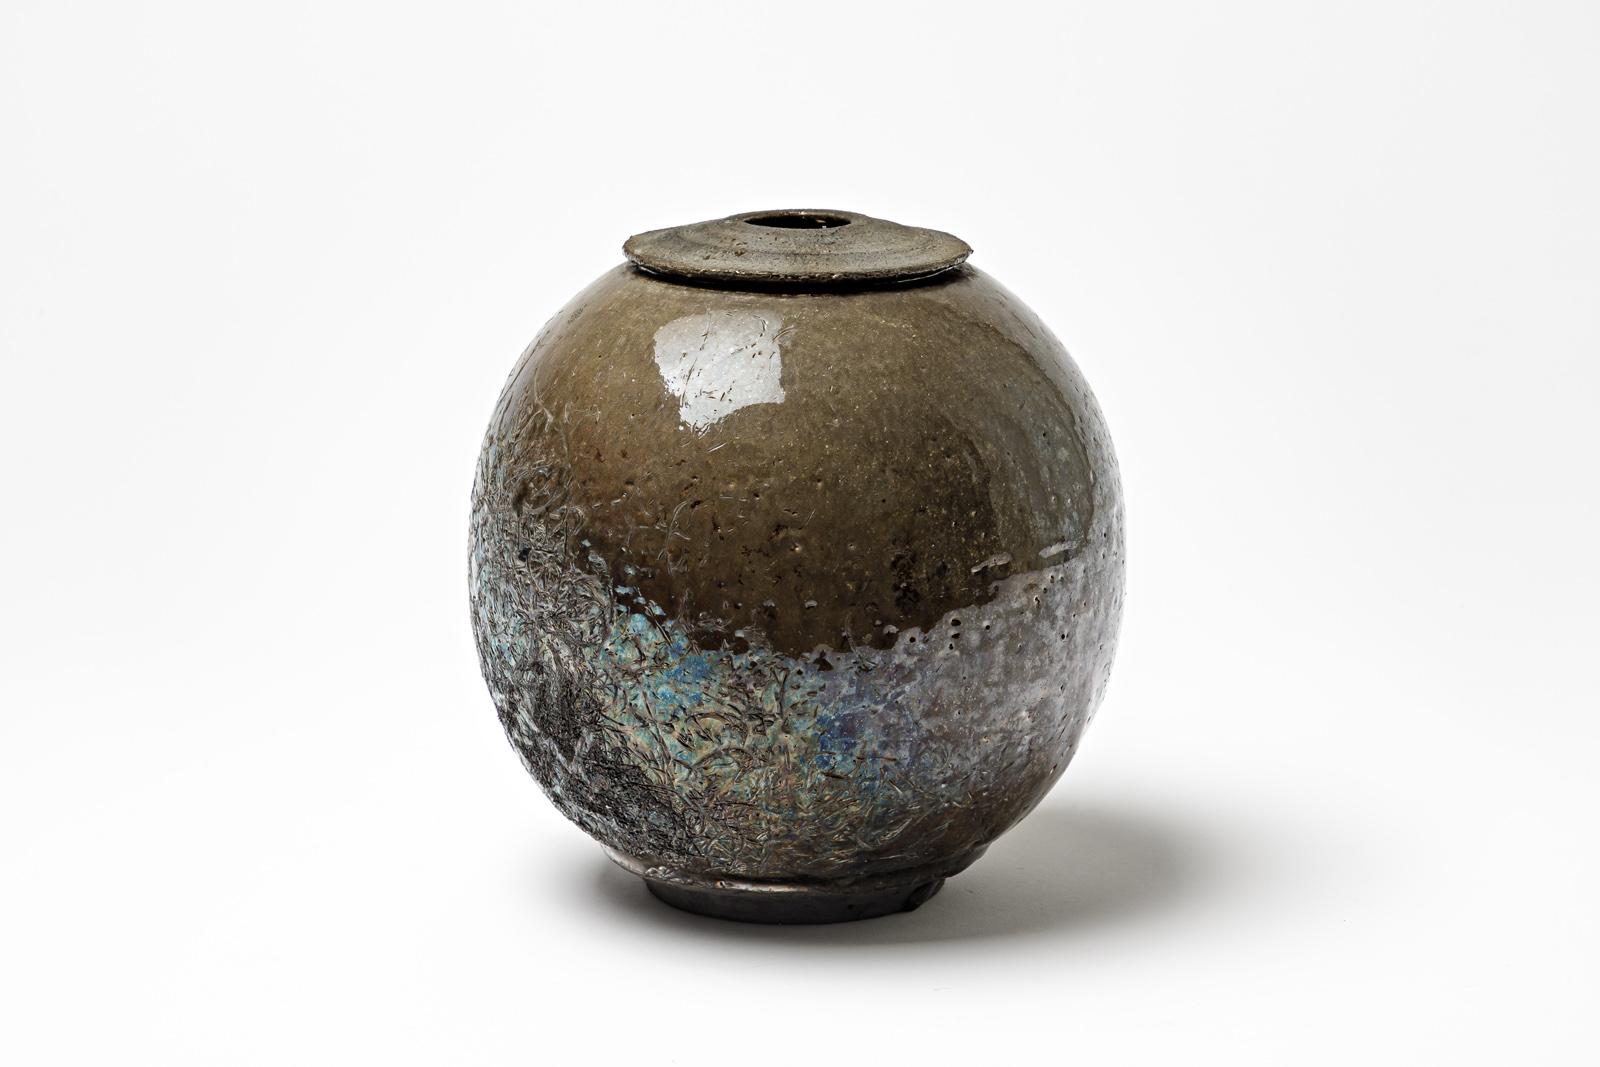  Brown glazed stoneware vase with metallic highlights by Gisèle Buthod Garçon. In Excellent Condition For Sale In Saint-Ouen, FR